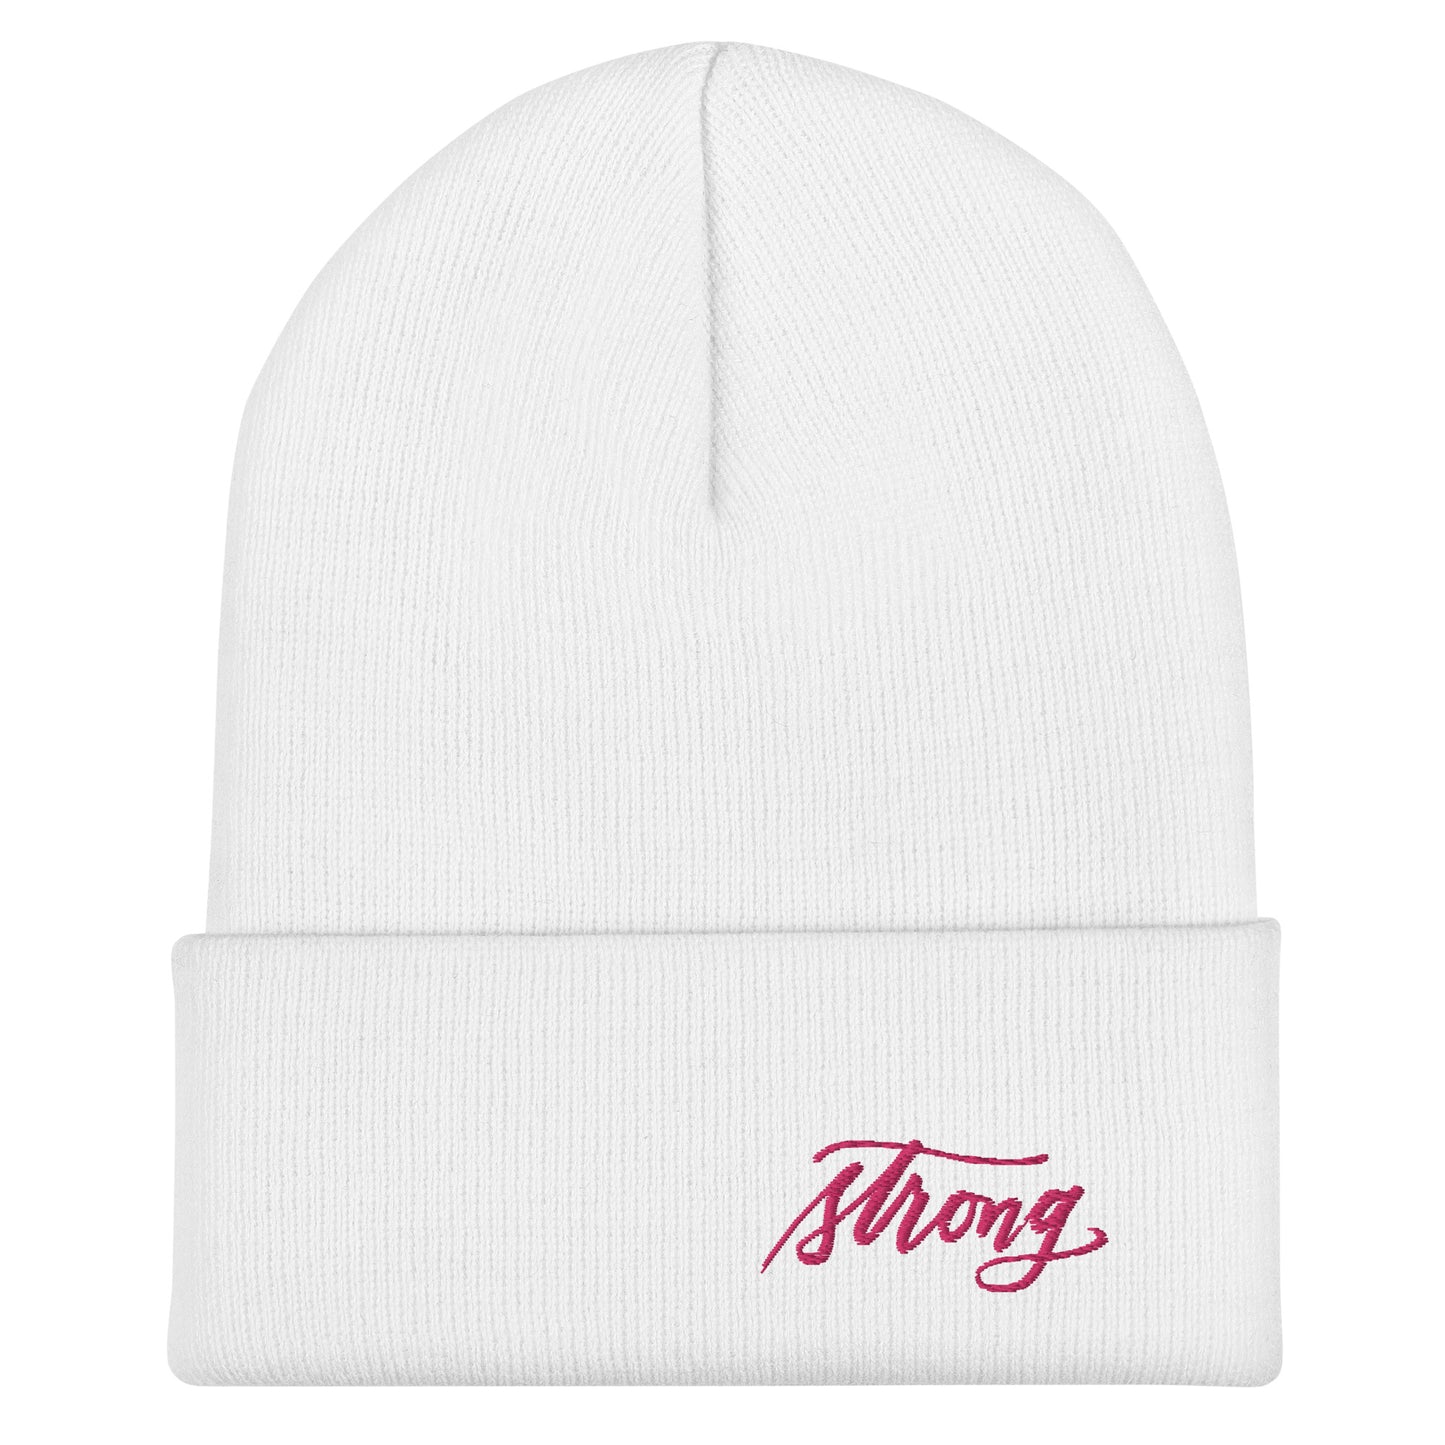 Embroidered Pink Script "Strong" Calligraphy on Pink or White Cuffed Beanie